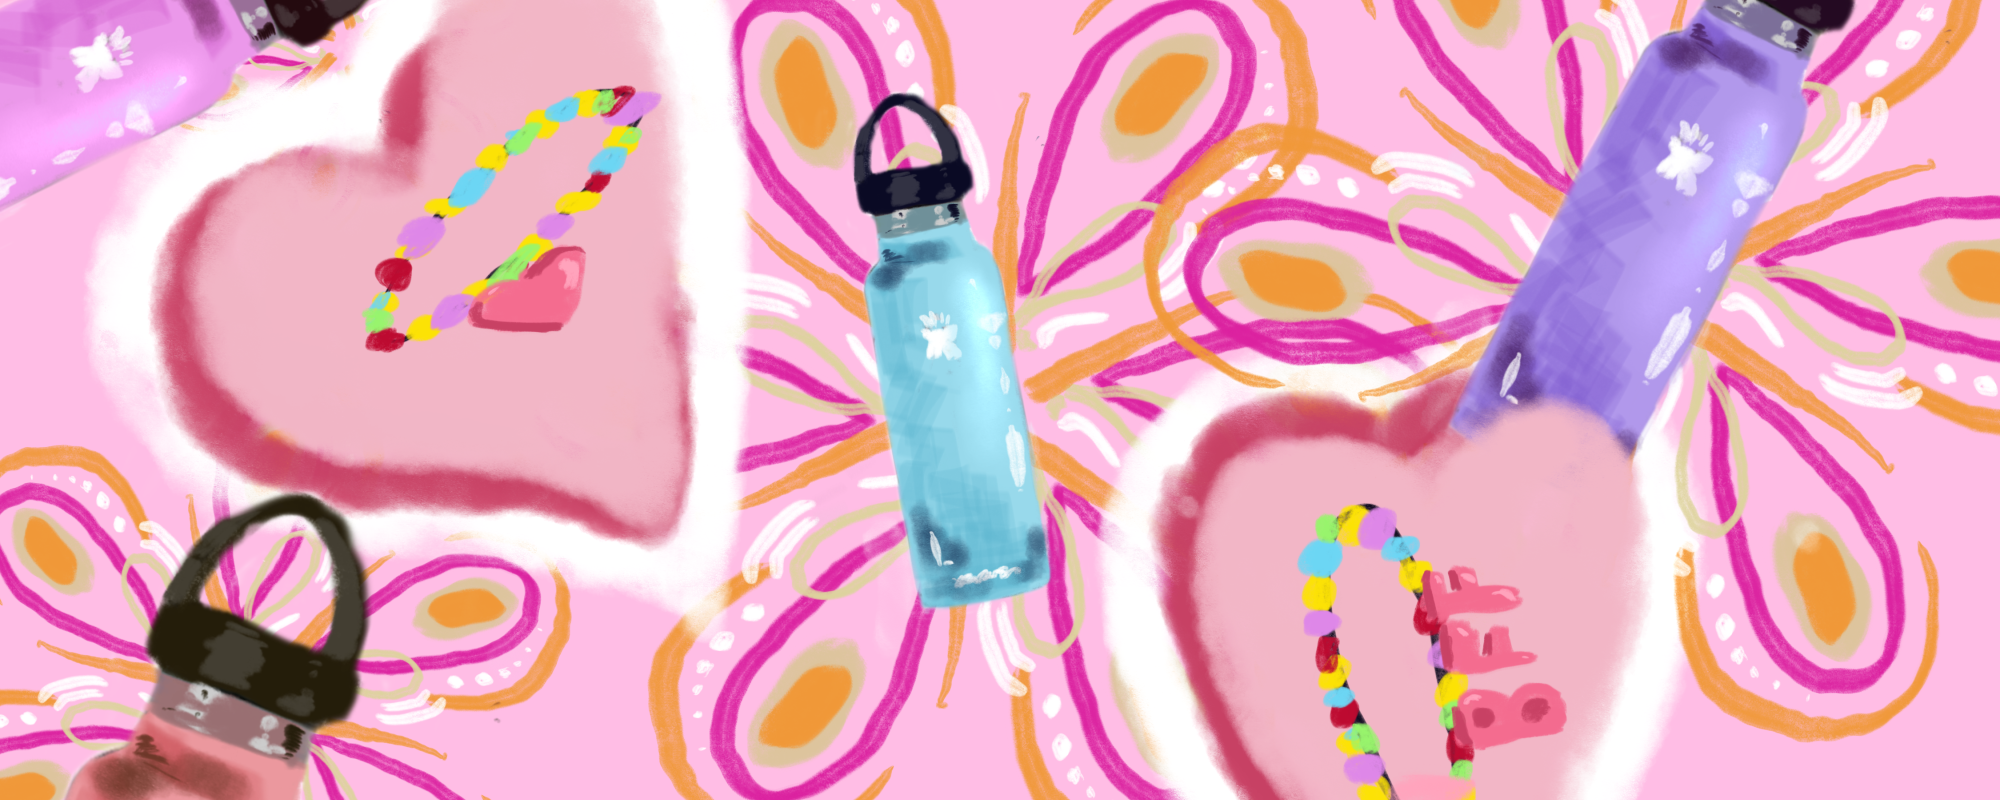 Pink hearts, necklaces, flowers and multicolored bright hydro flask water bottles on a pink background.